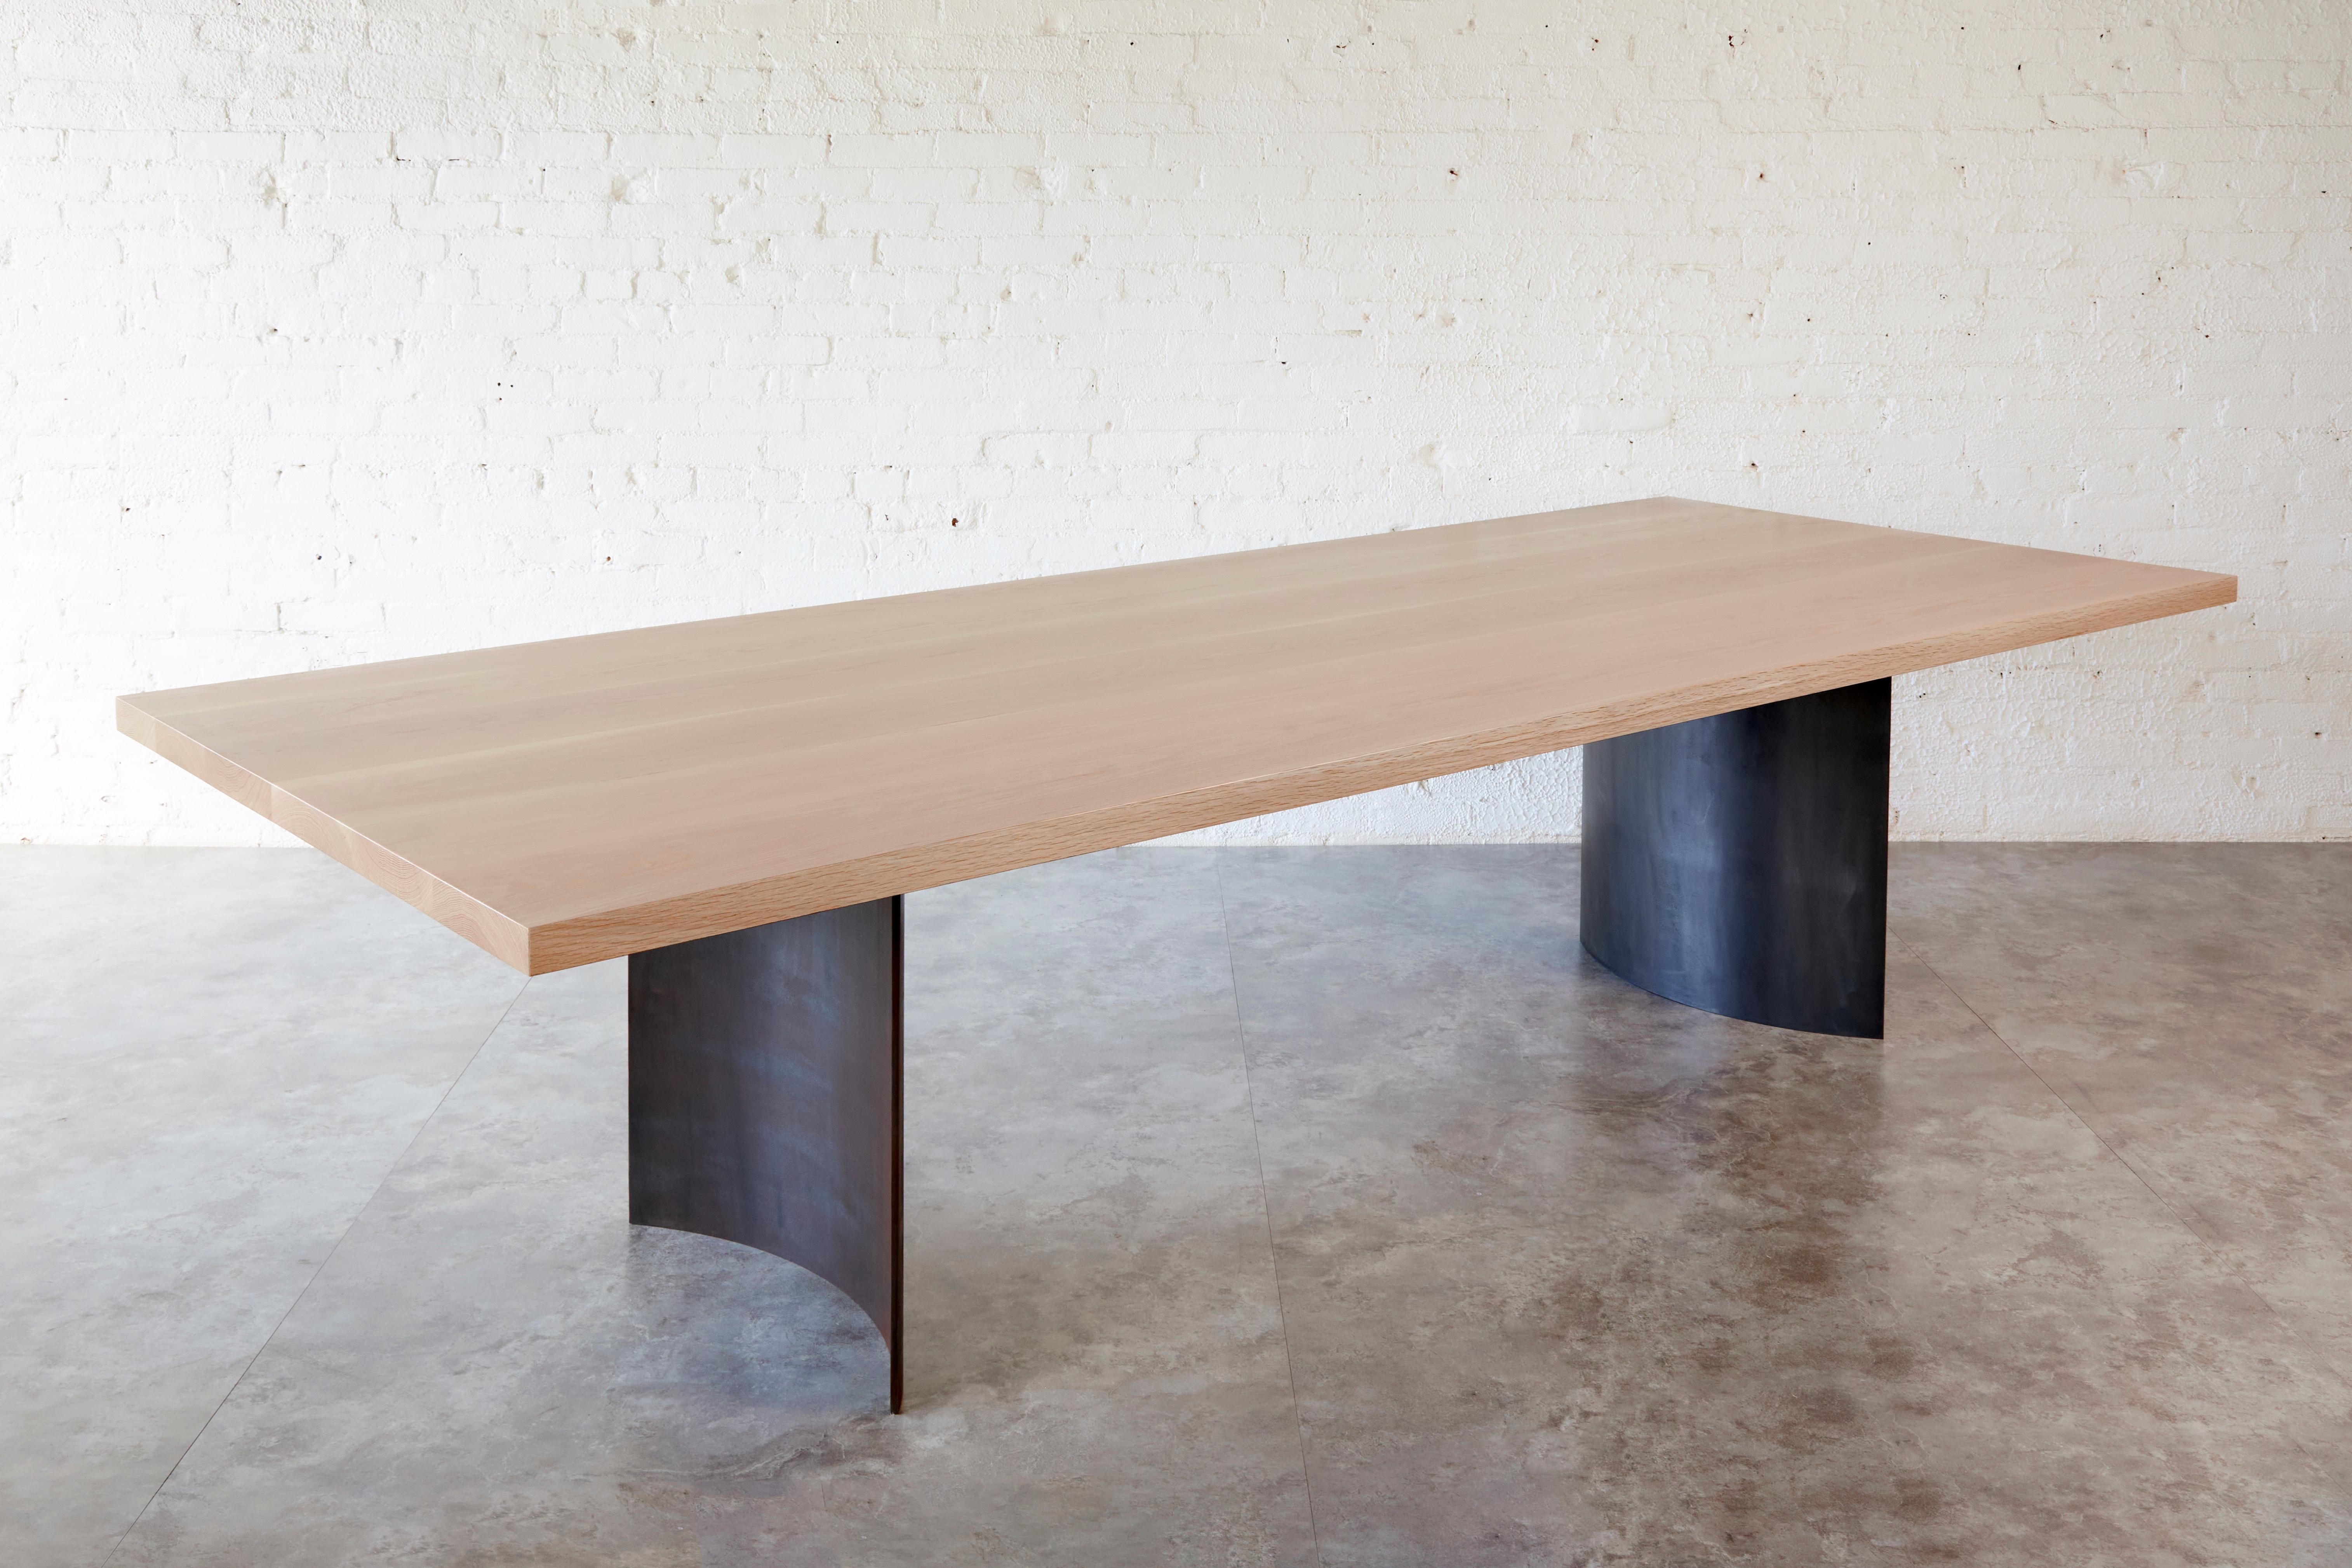 The Ban table in White Oak by Autonomous Furniture - where contemporary design meets natural beauty. Crafted with precision and passion, this exquisite dining table effortlessly blends Scandinavian influences with modern sophistication. Crafted from